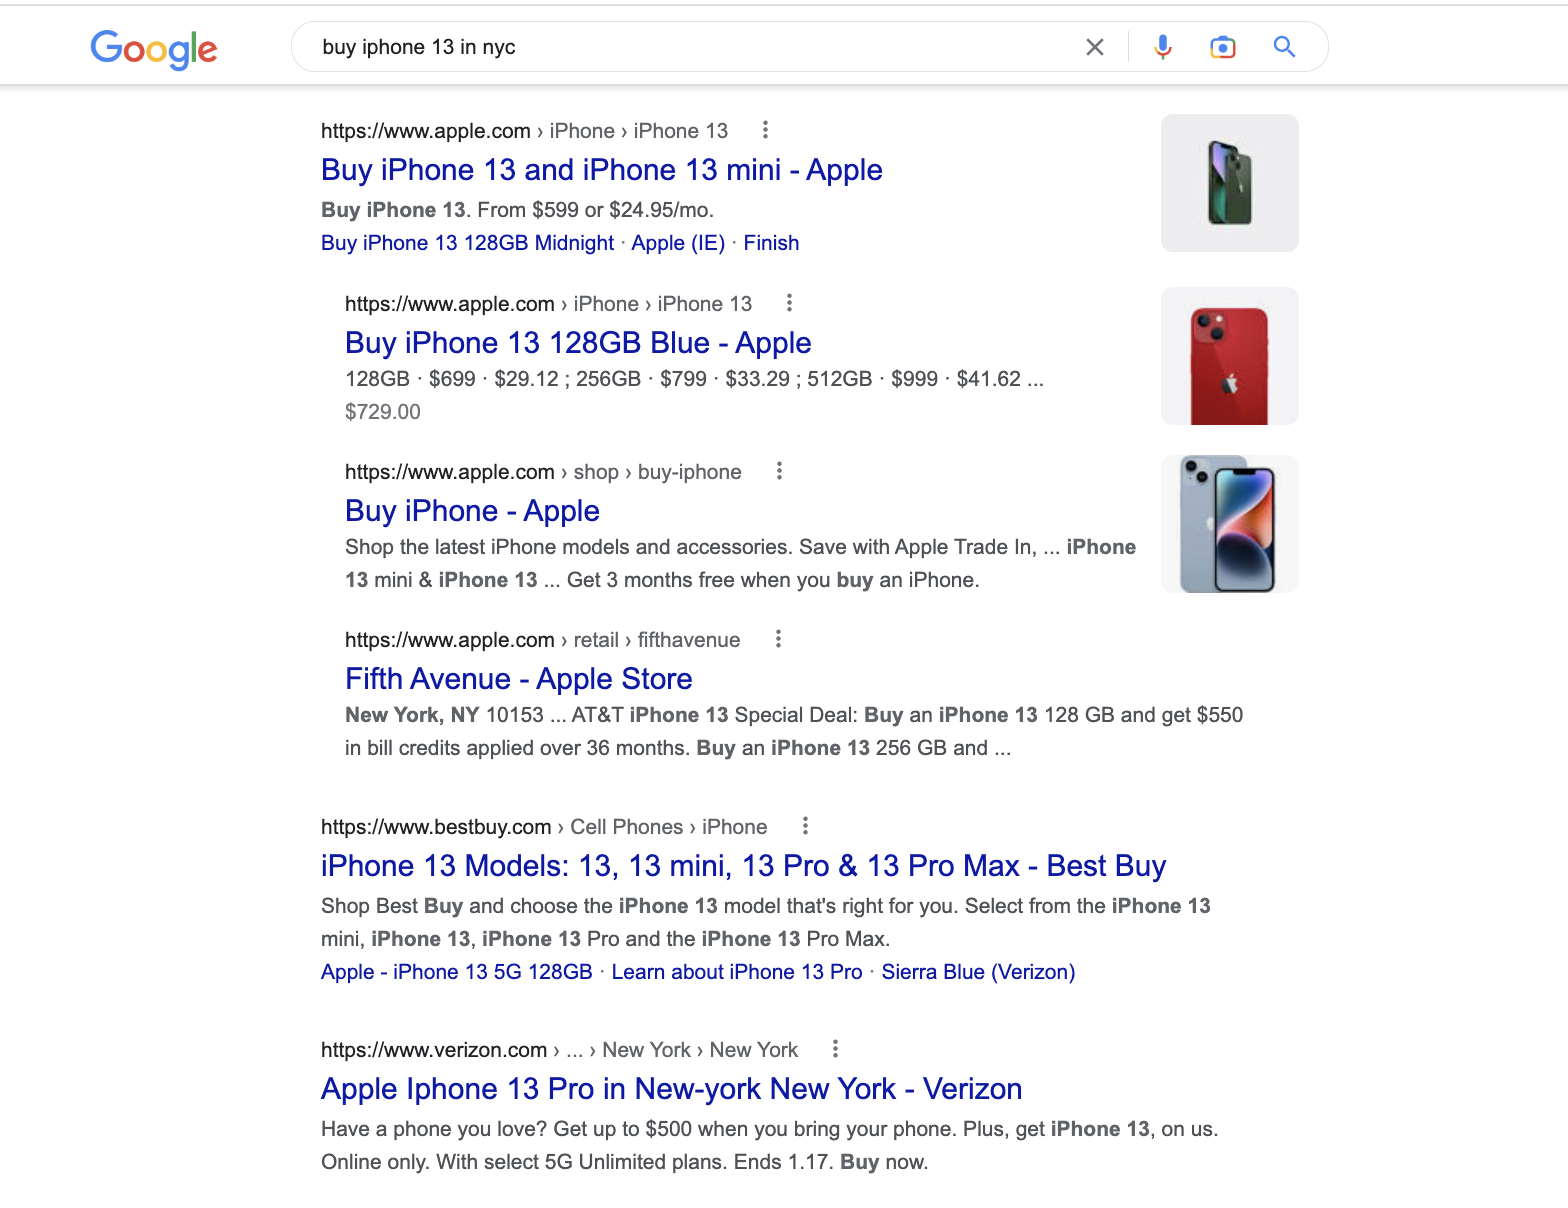 Google Search Engine Results Page for a Query with Transactional Intent